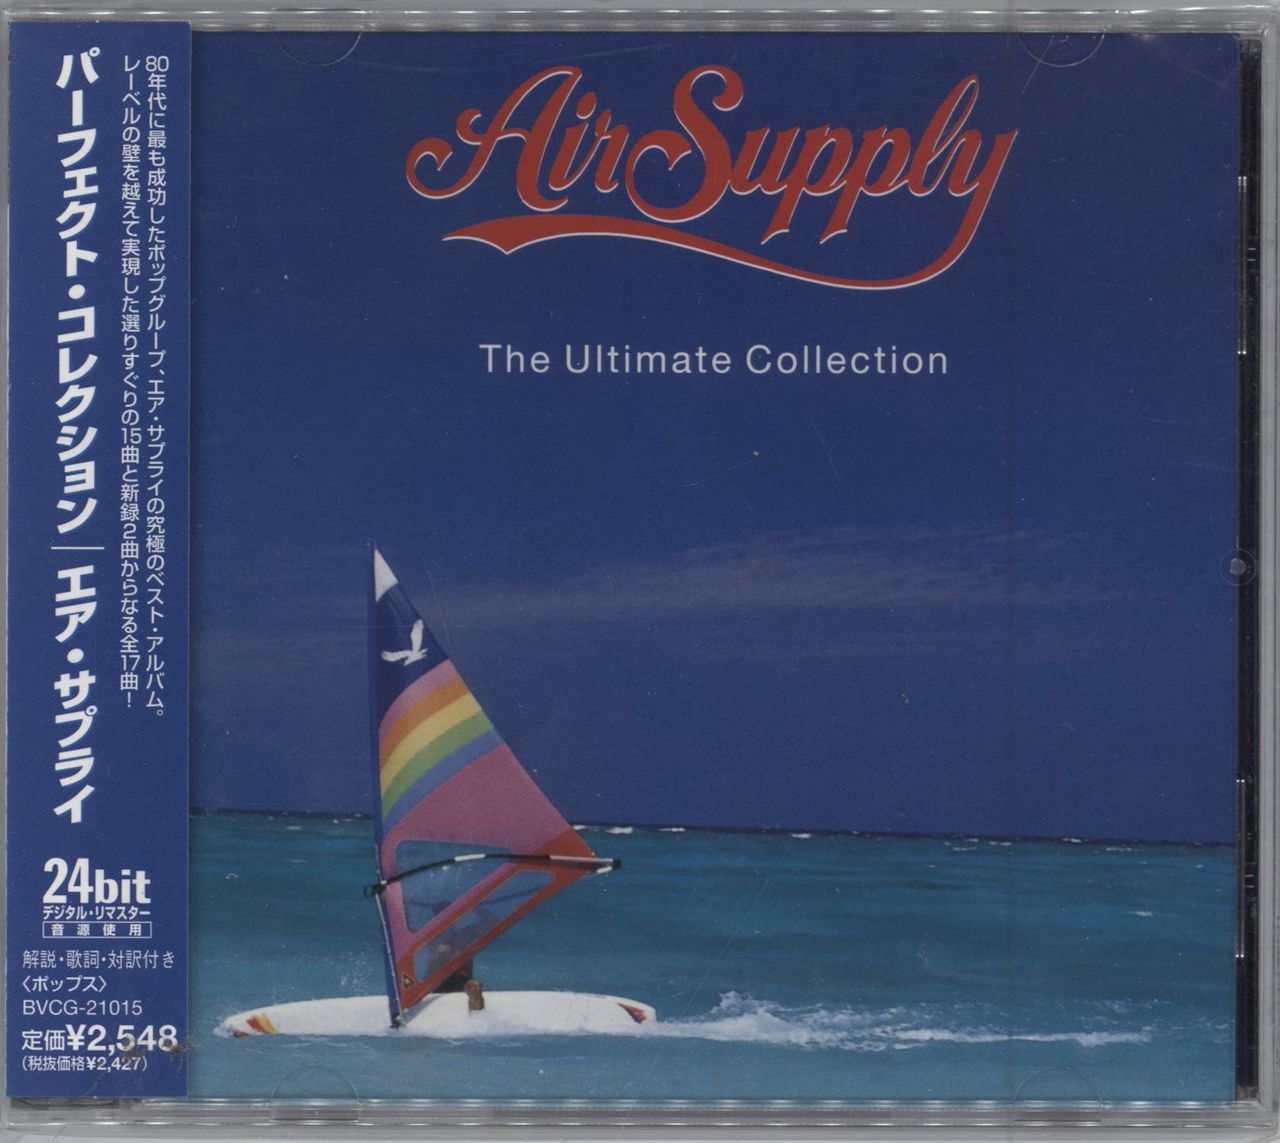 Air Supply The Ultimate Collection Japanese Promo CD album (CDLP) BVCG-21015